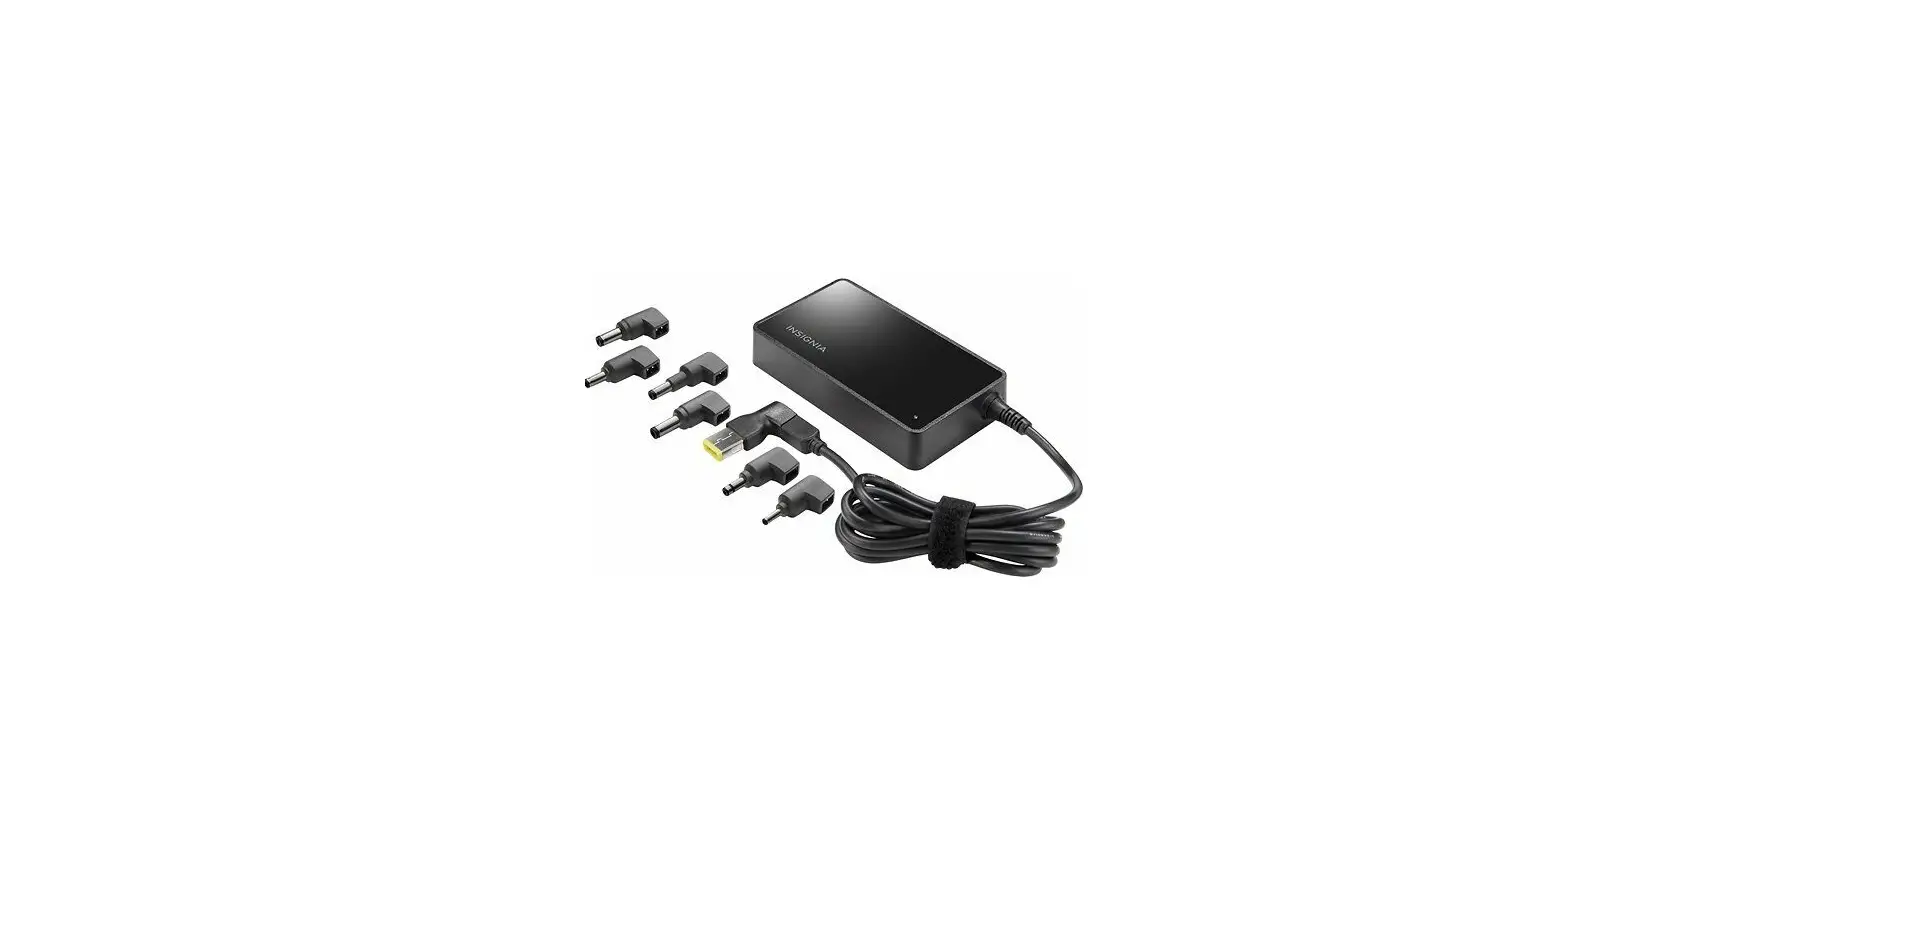 NS-PWLC563/ NS-PWLC563-C Ultrabook Charger